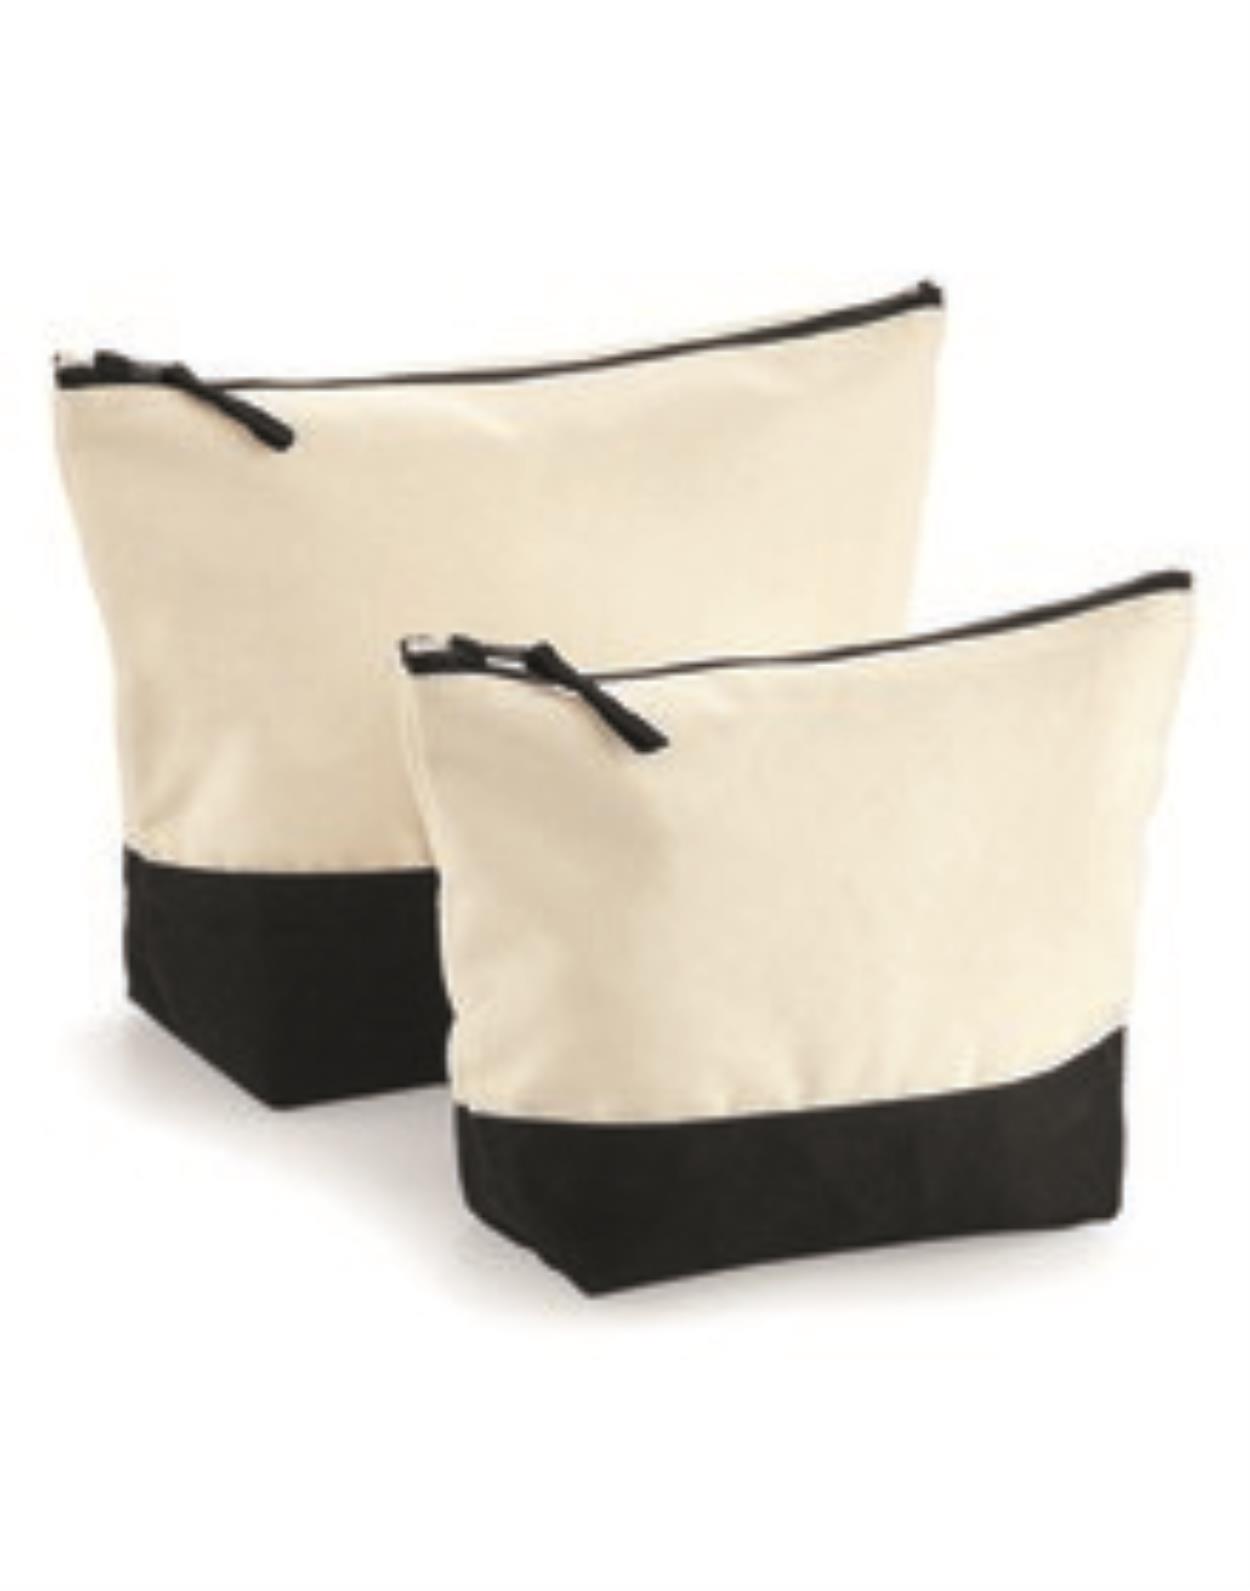 W544 Dipped Base Canvas Accessory Bag Image 1